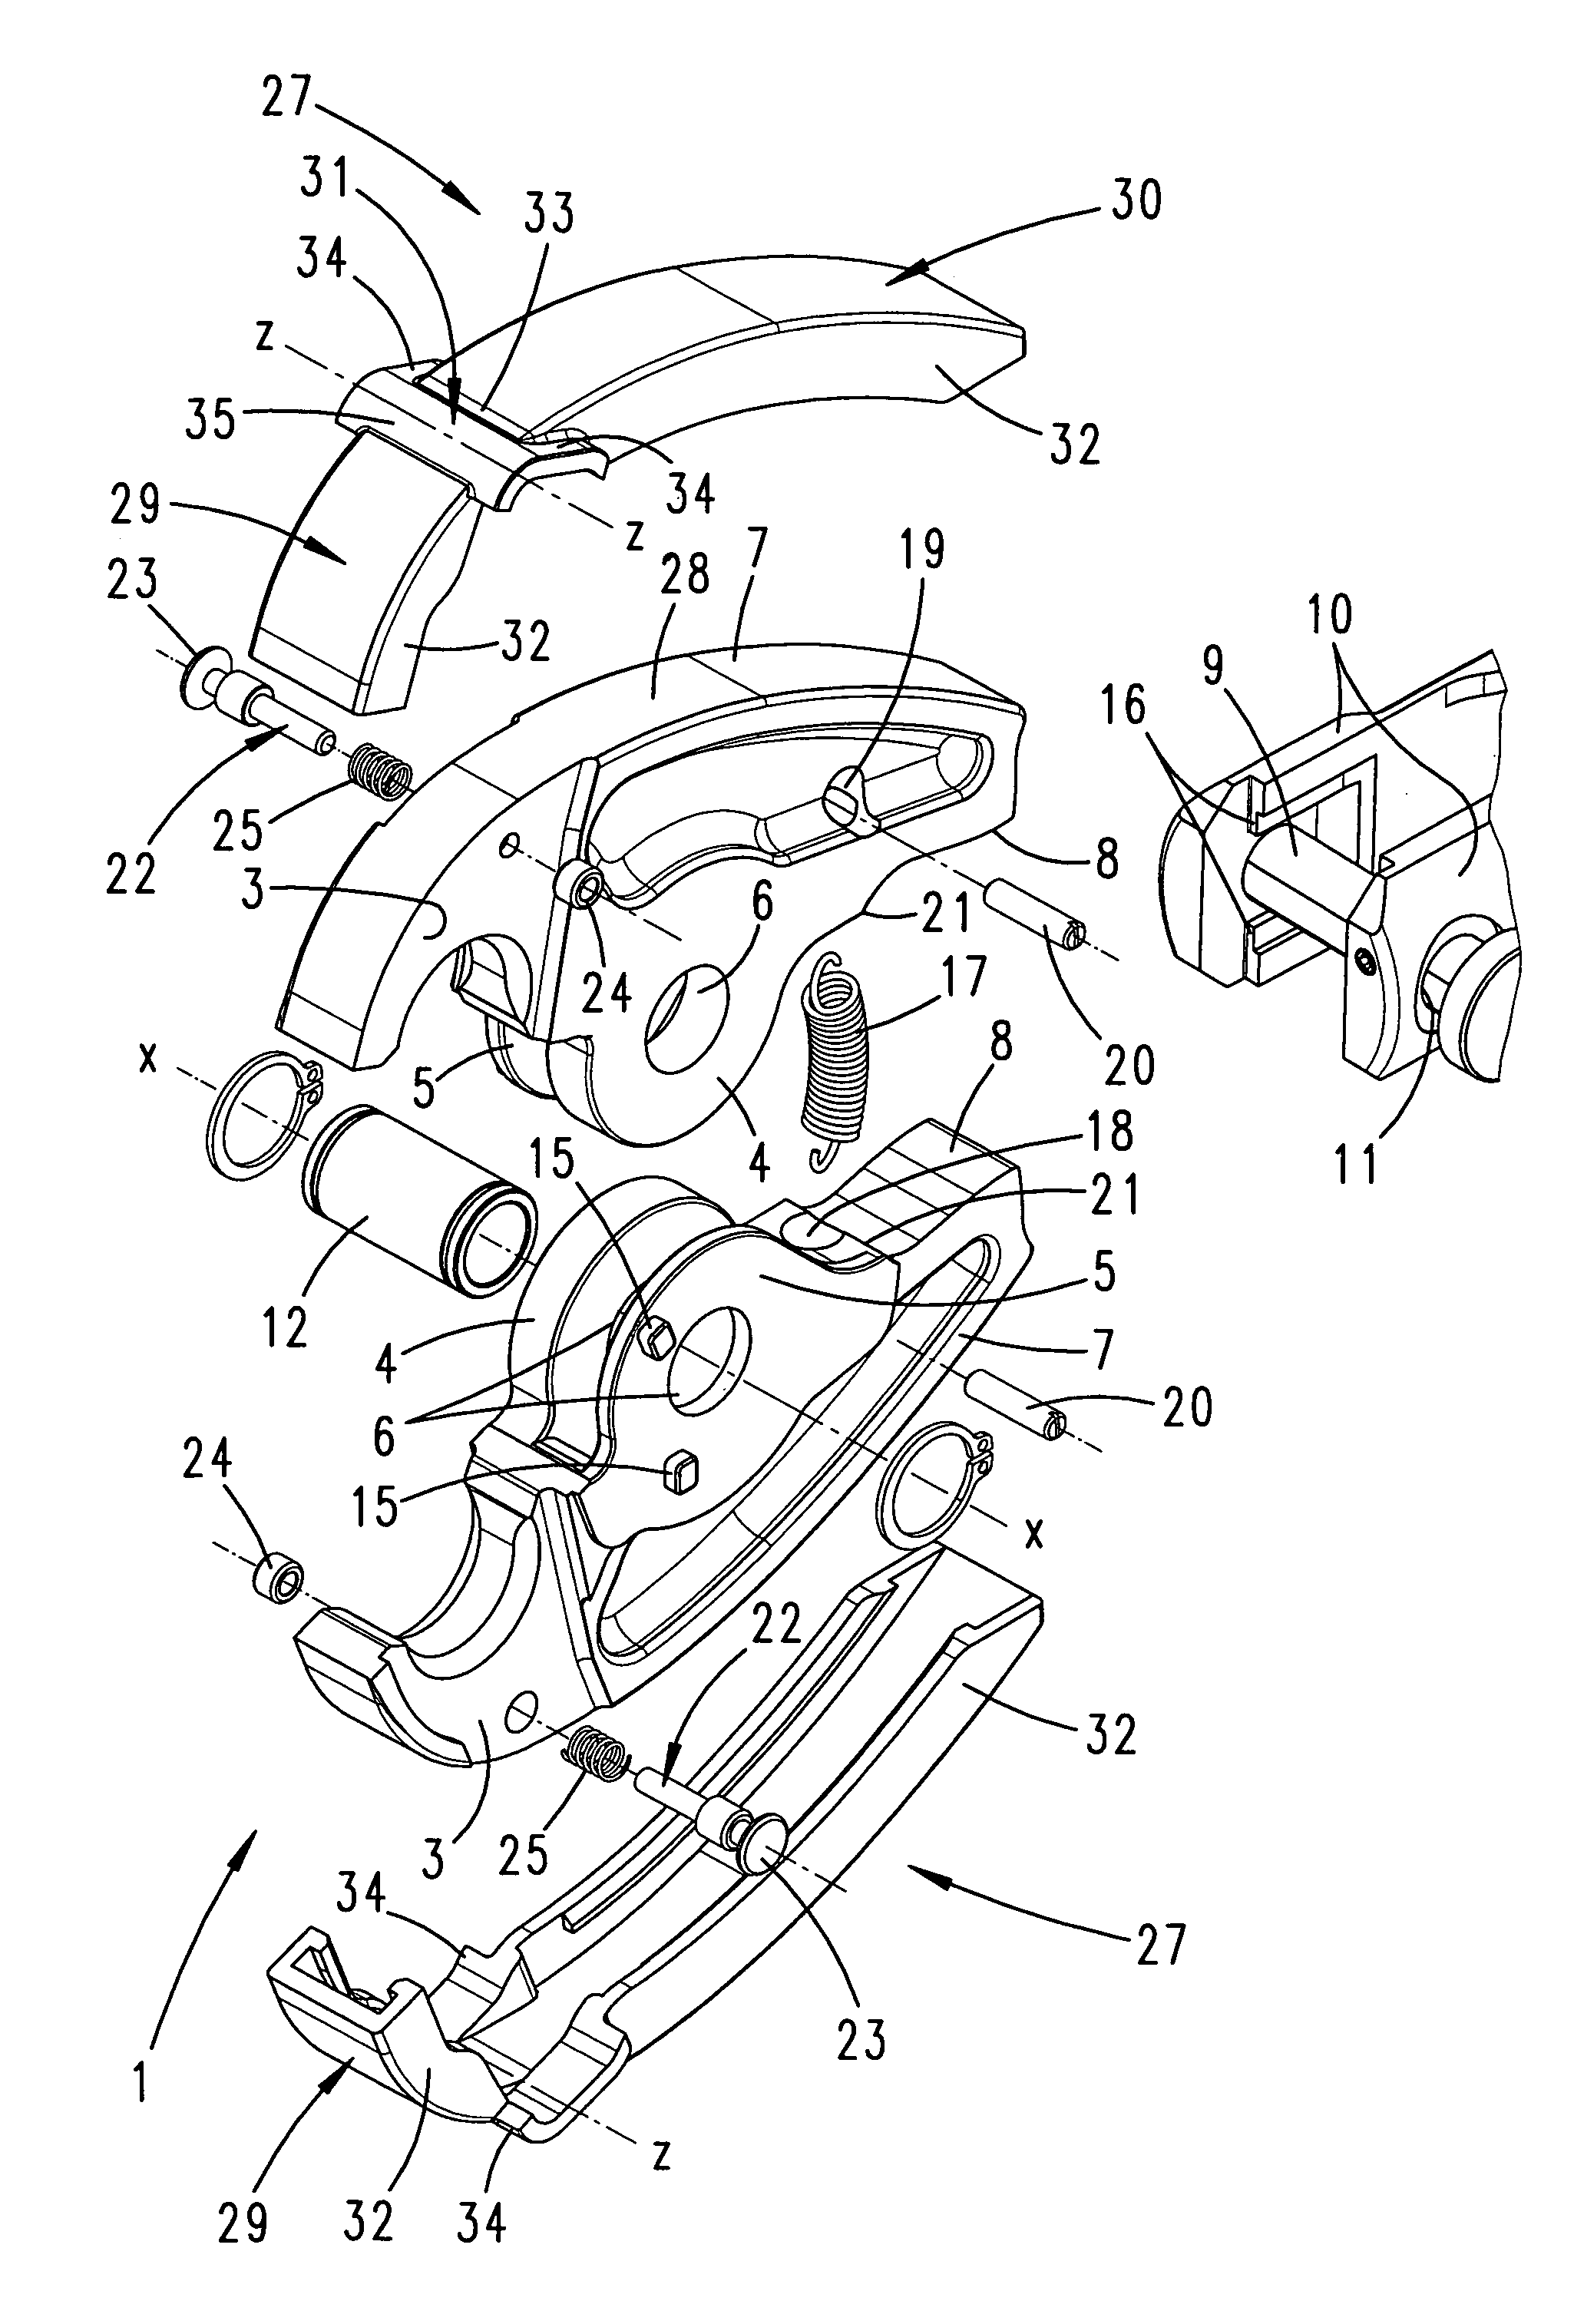 Pair of pressing jaws for hydraulic or electric pressing tools, and insulating covering for a pressing jaw